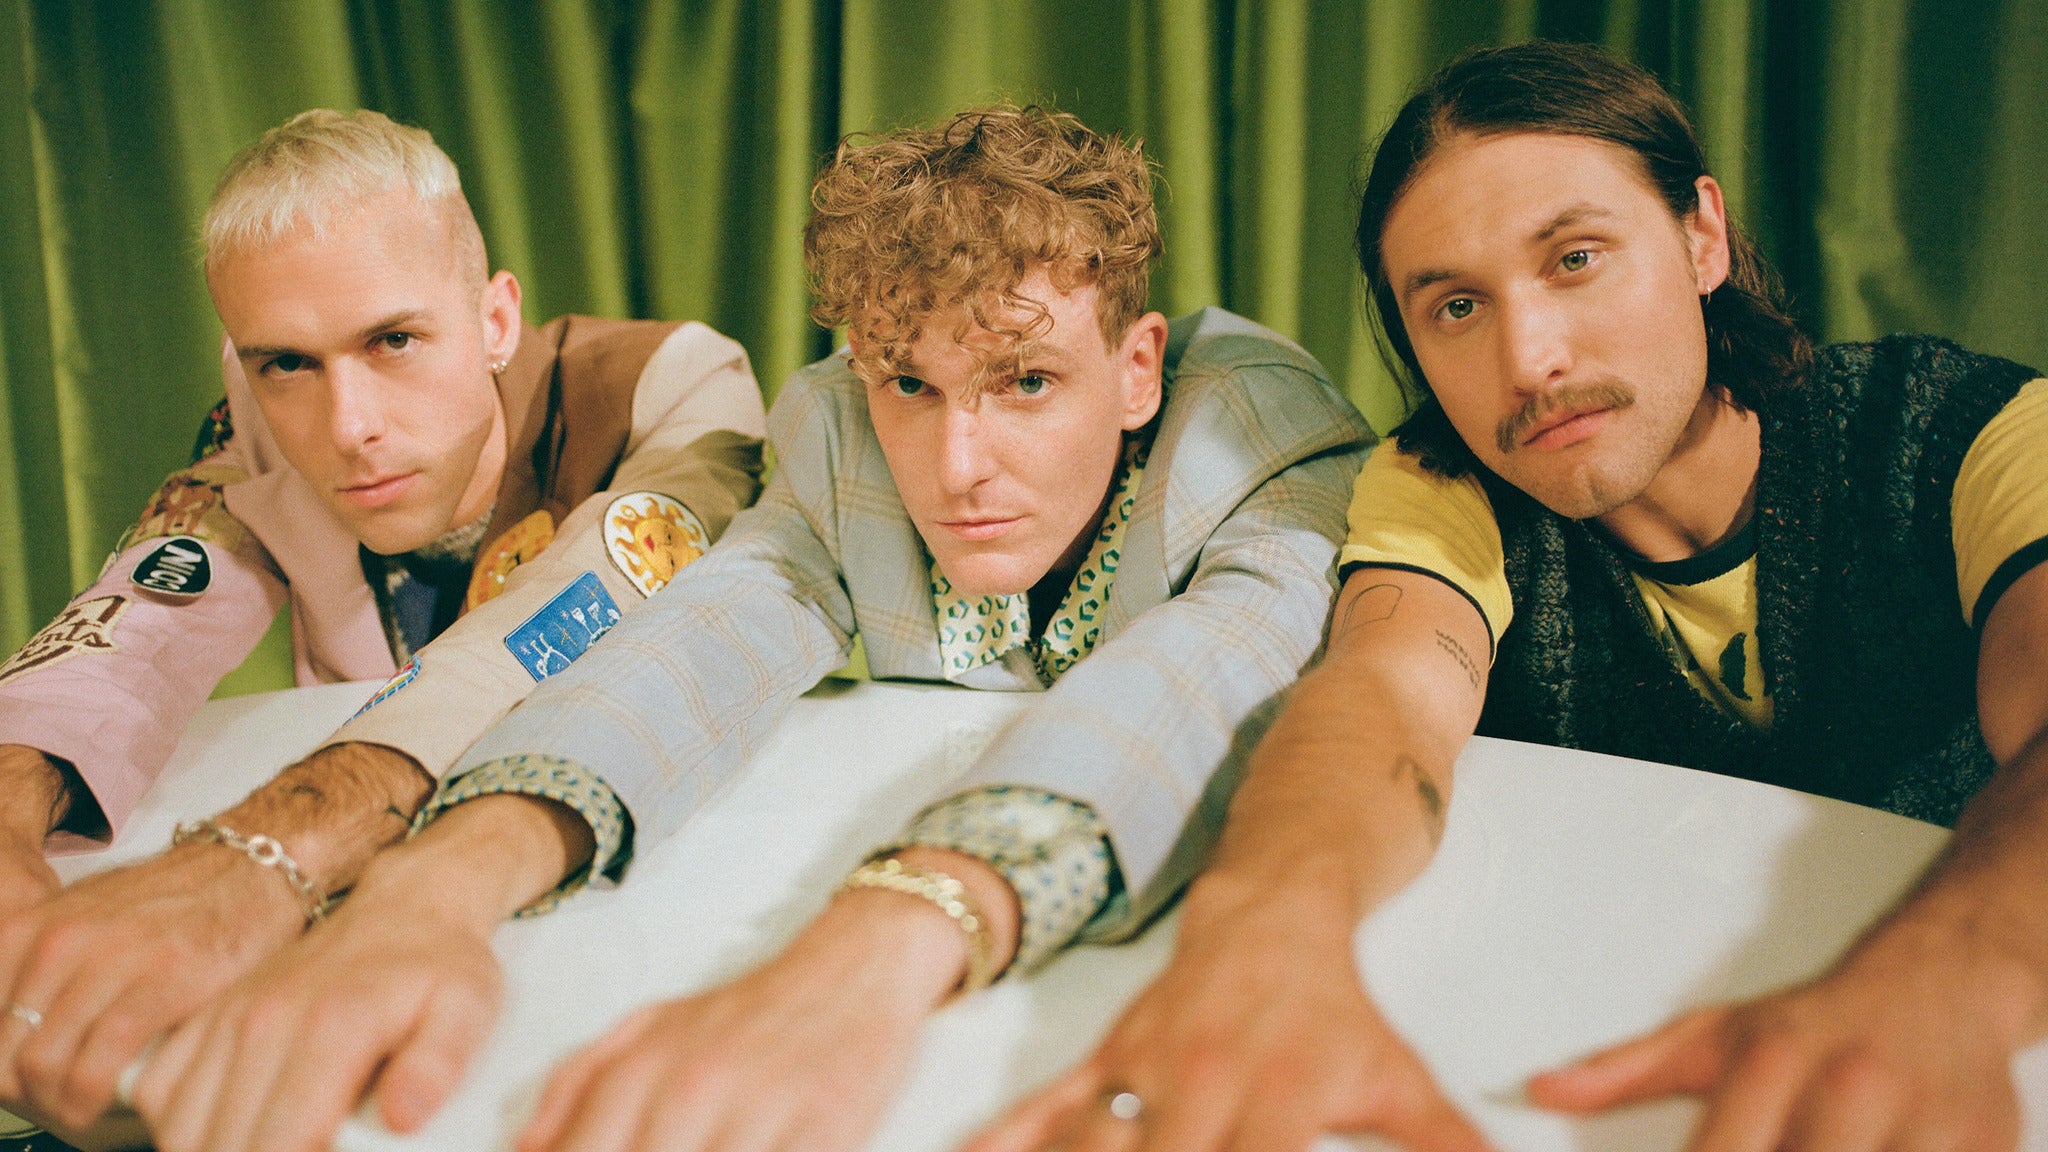 COIN: Rainbow Dreamland Tour in Baltimore promo photo for Artist presale offer code